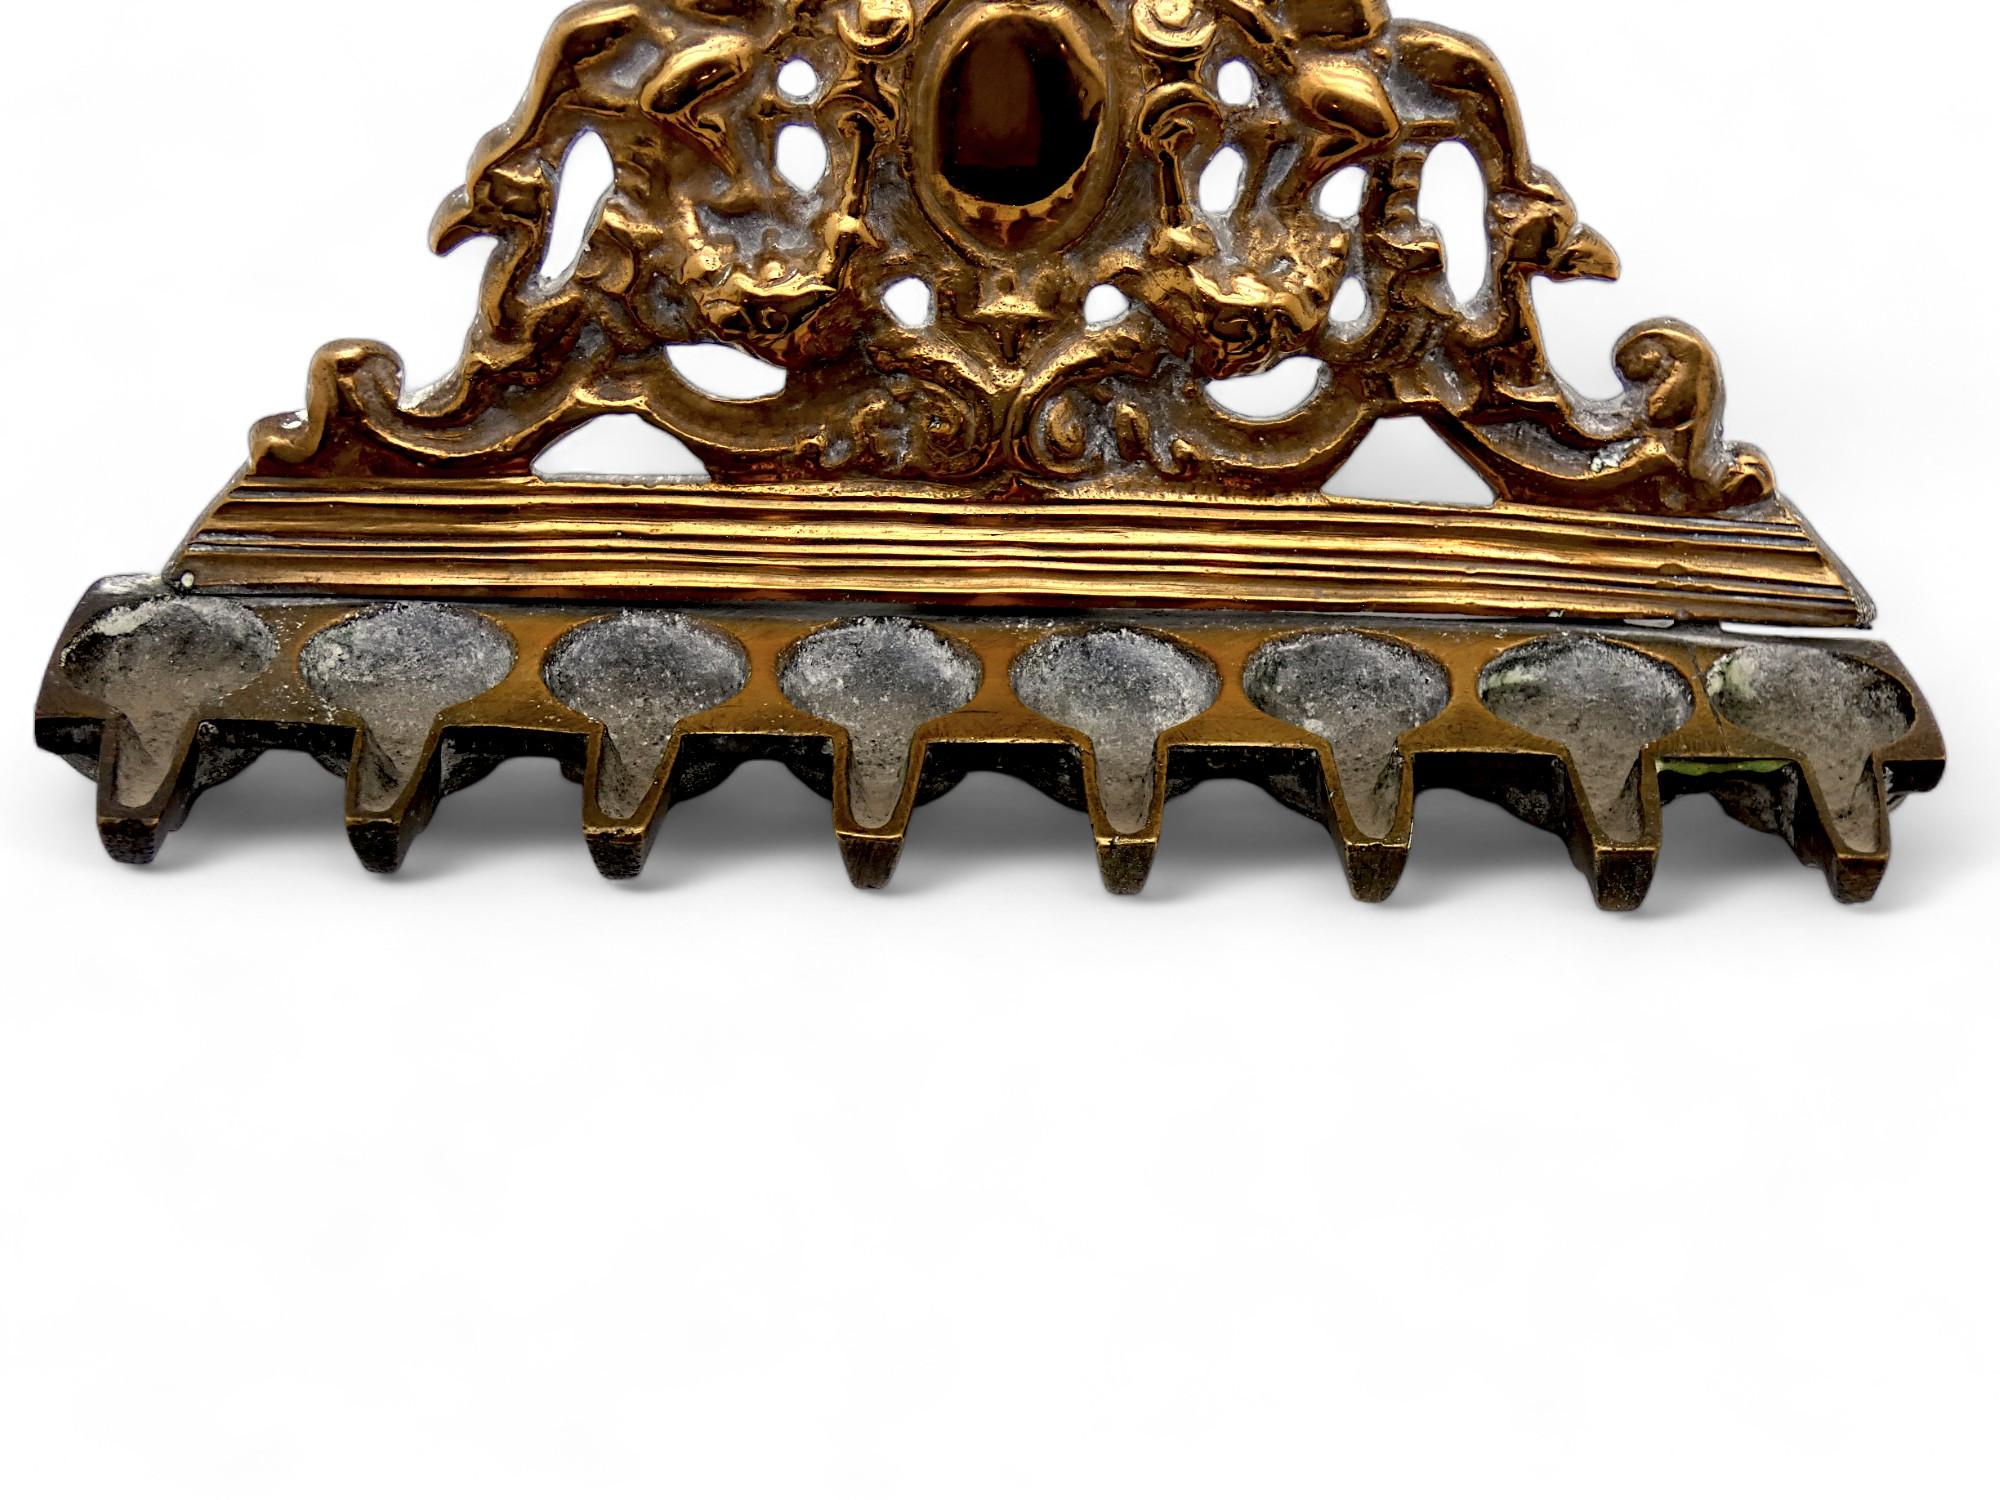 A wonderfully designed Hanukkah Lamp made in Italy in the 17-18th centuries maybe earlier.

This Hanukkah lamp backplate is designed in a triangular shape as was classic with older Italian designs in furniture, wooden frames, and other Italian